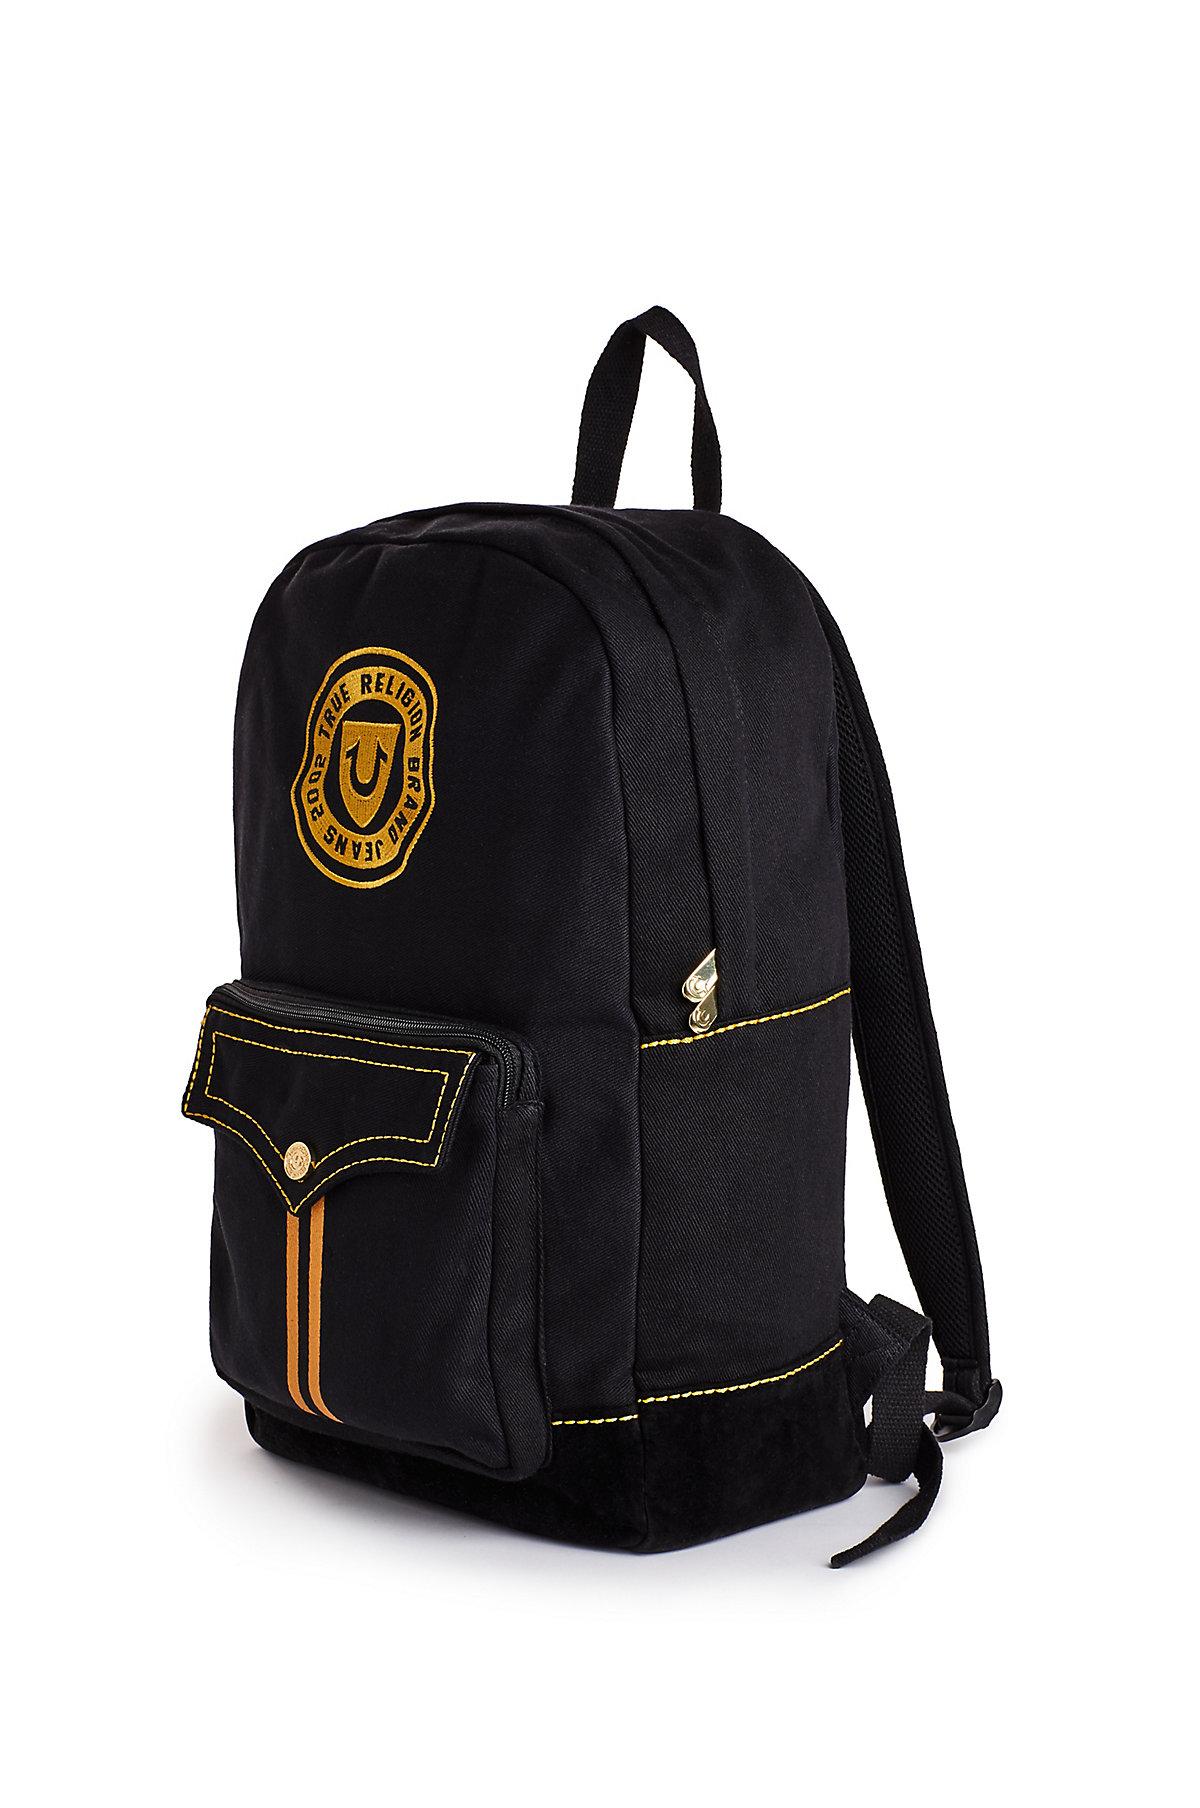 true religion backpack black and gold